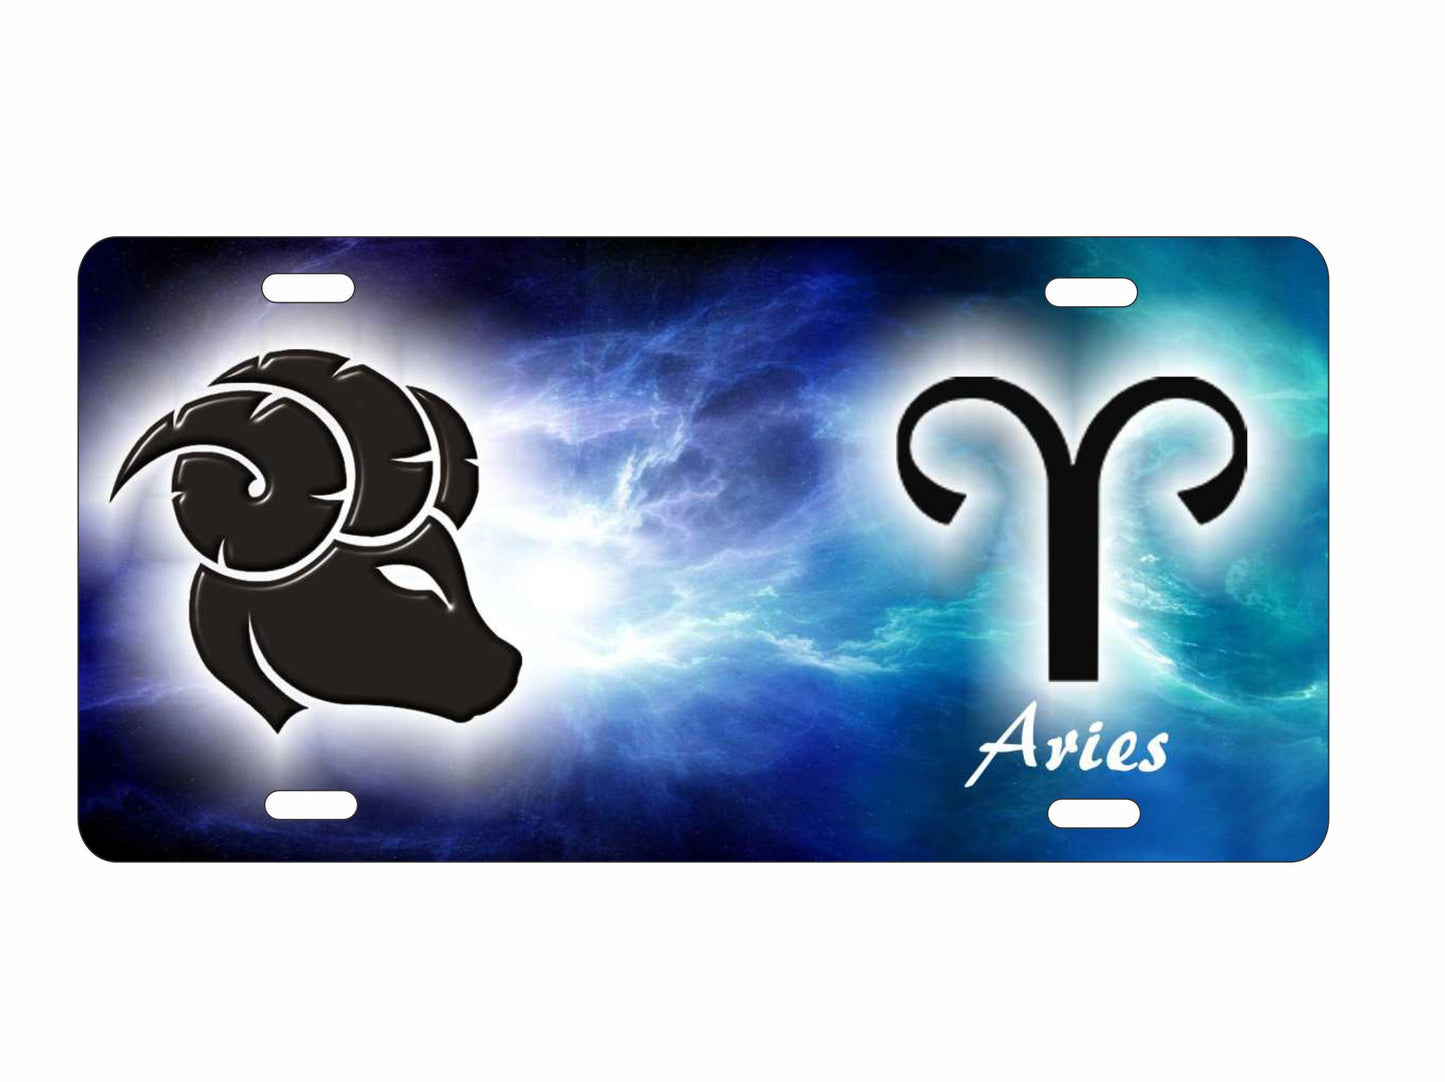 Aries zodiac Astrological sign personalized novelty decorative front license plate